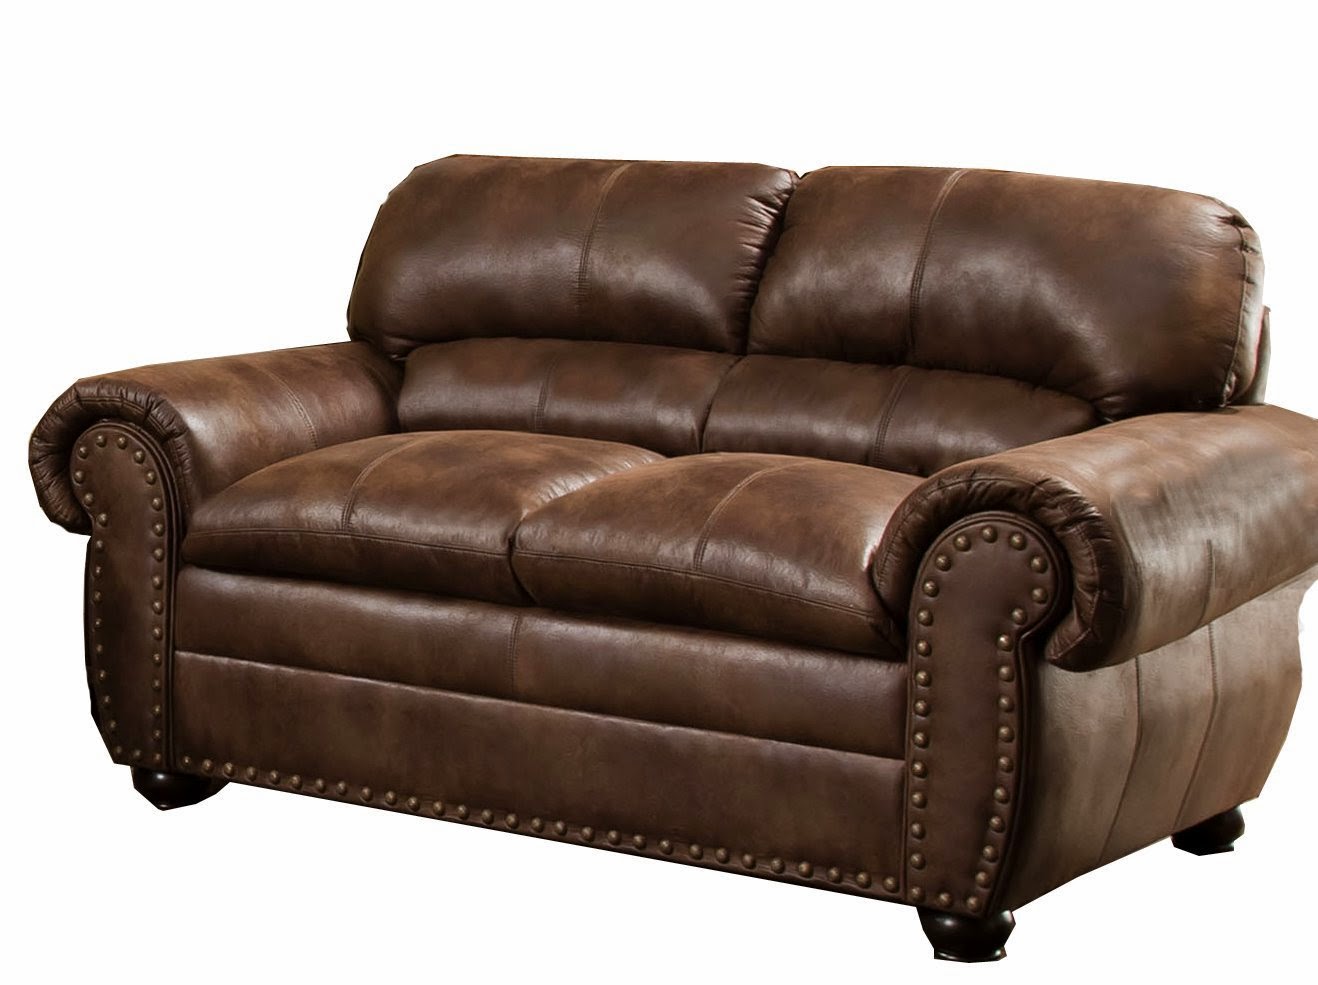 compact leather recliner sofa